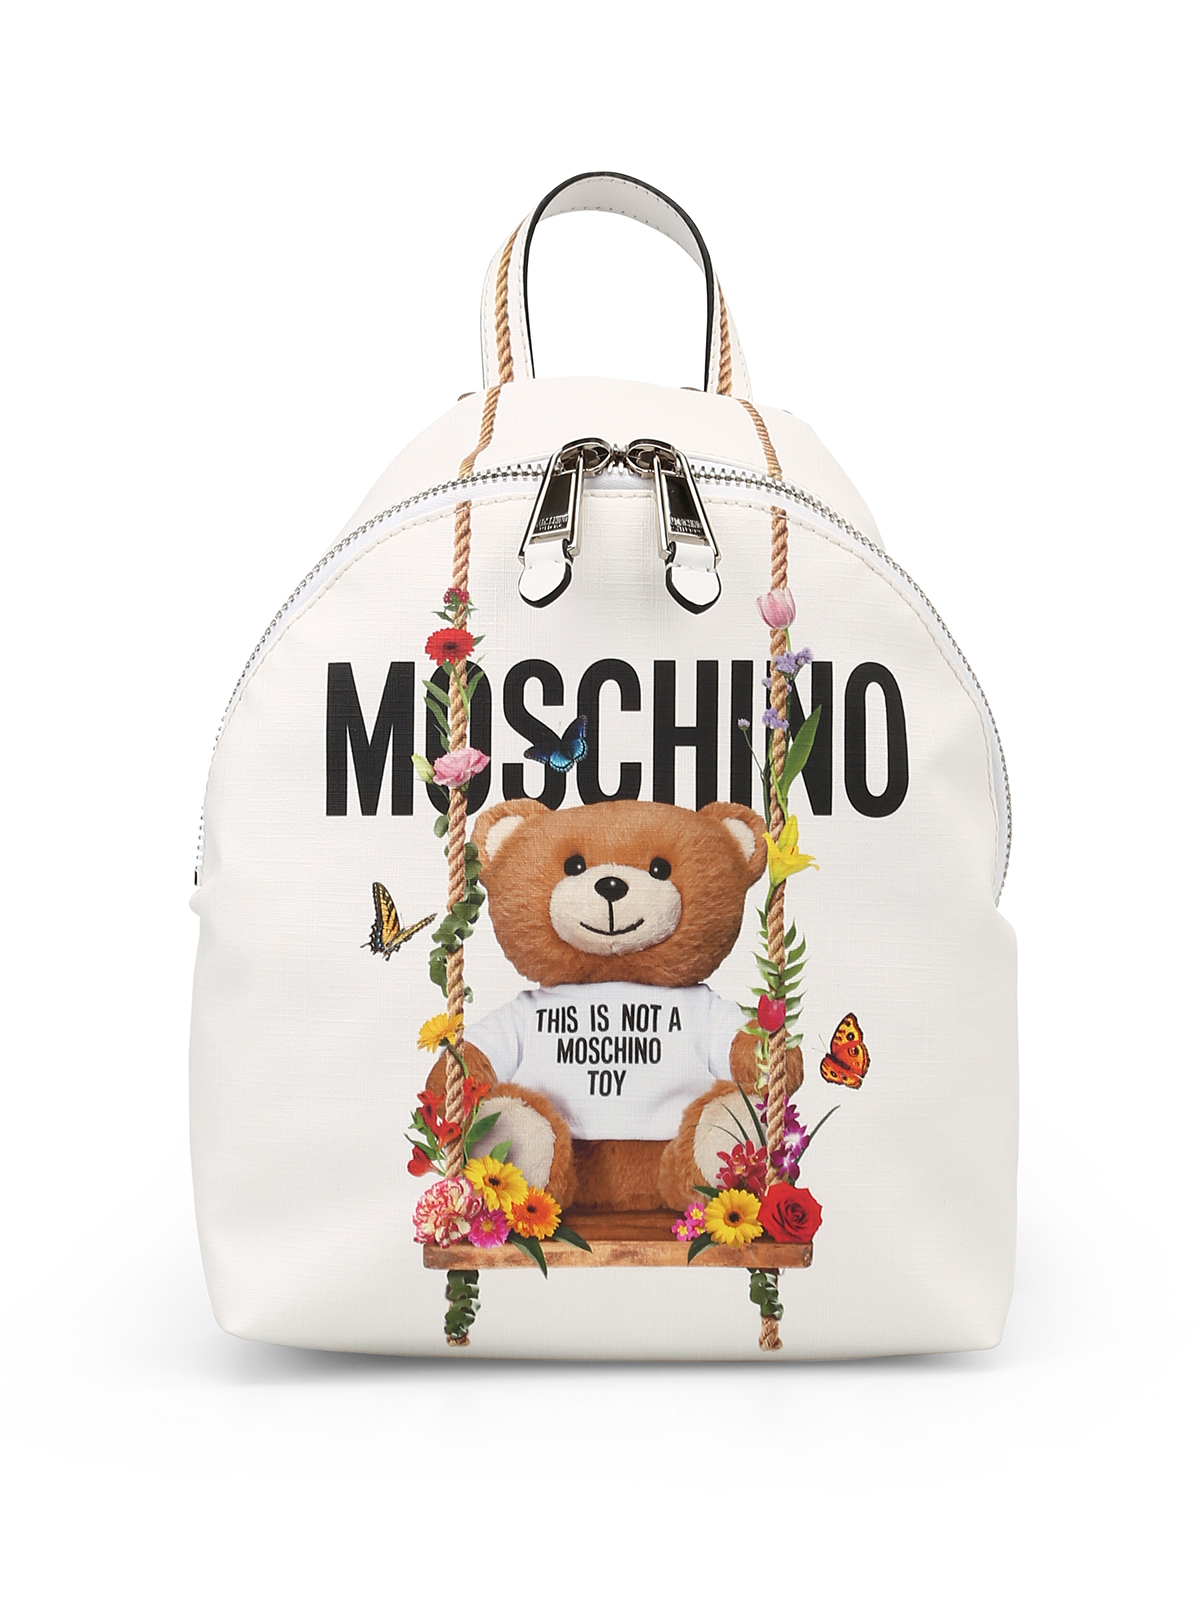 this is not a moschino toy bag